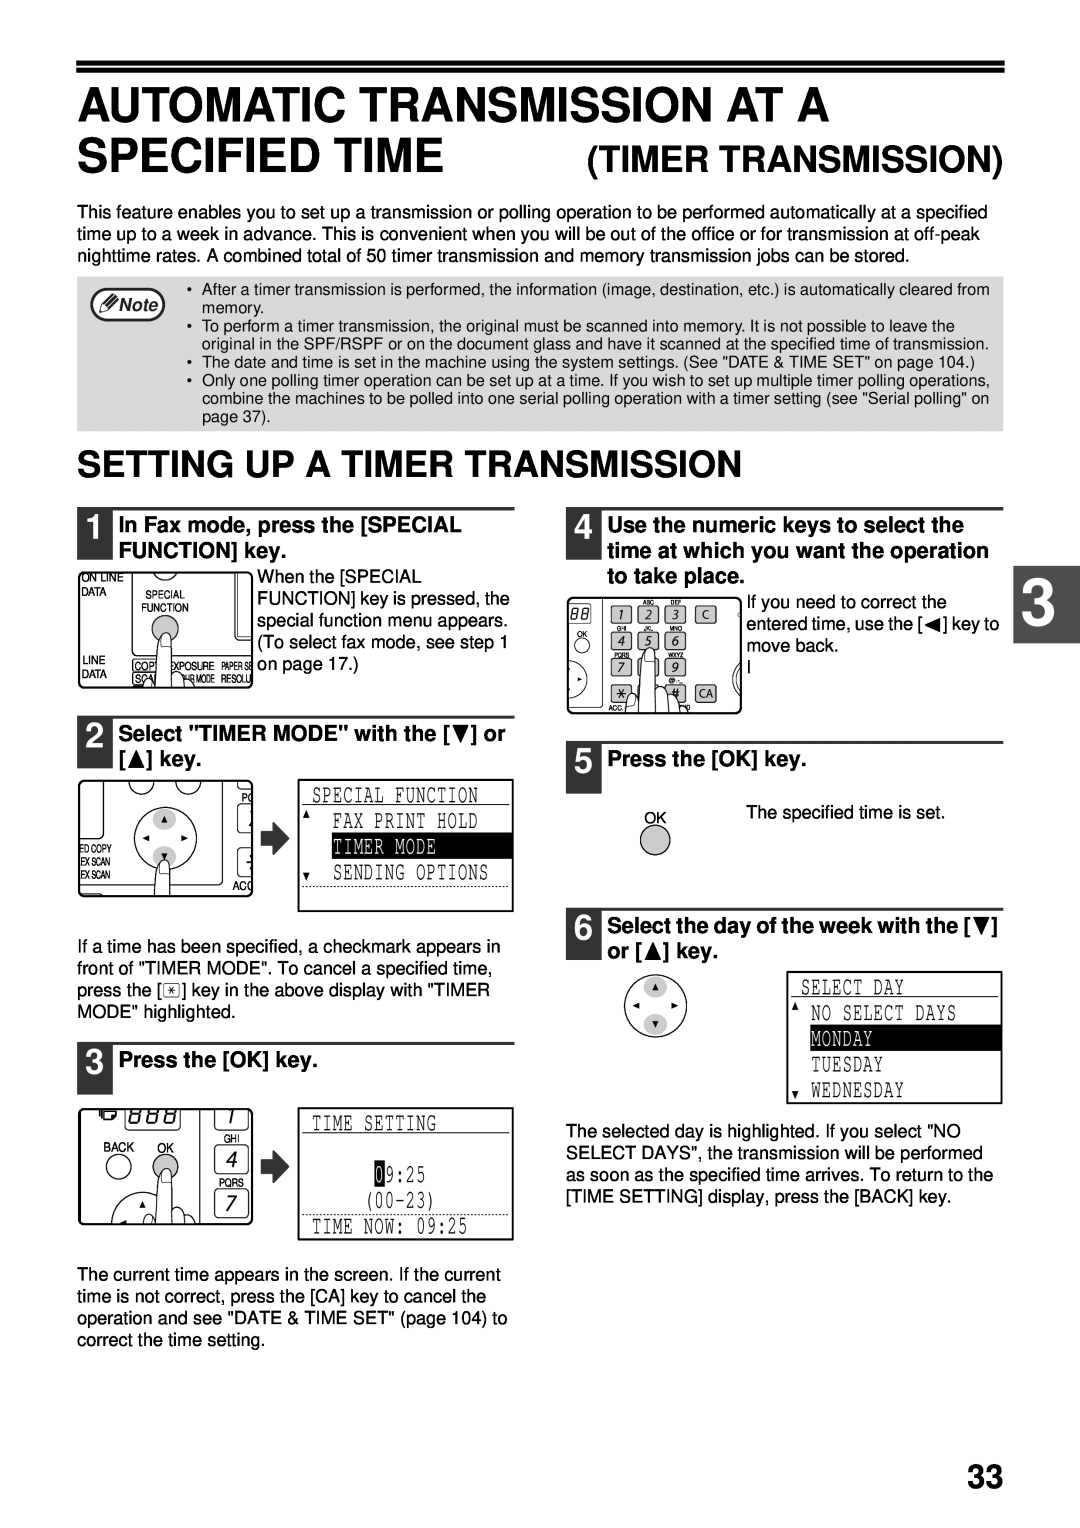 Sharp MX-FX13 Automatic Transmission At A, Specified Time, Setting Up A Timer Transmission, Timer Mode, Monday, 0925 